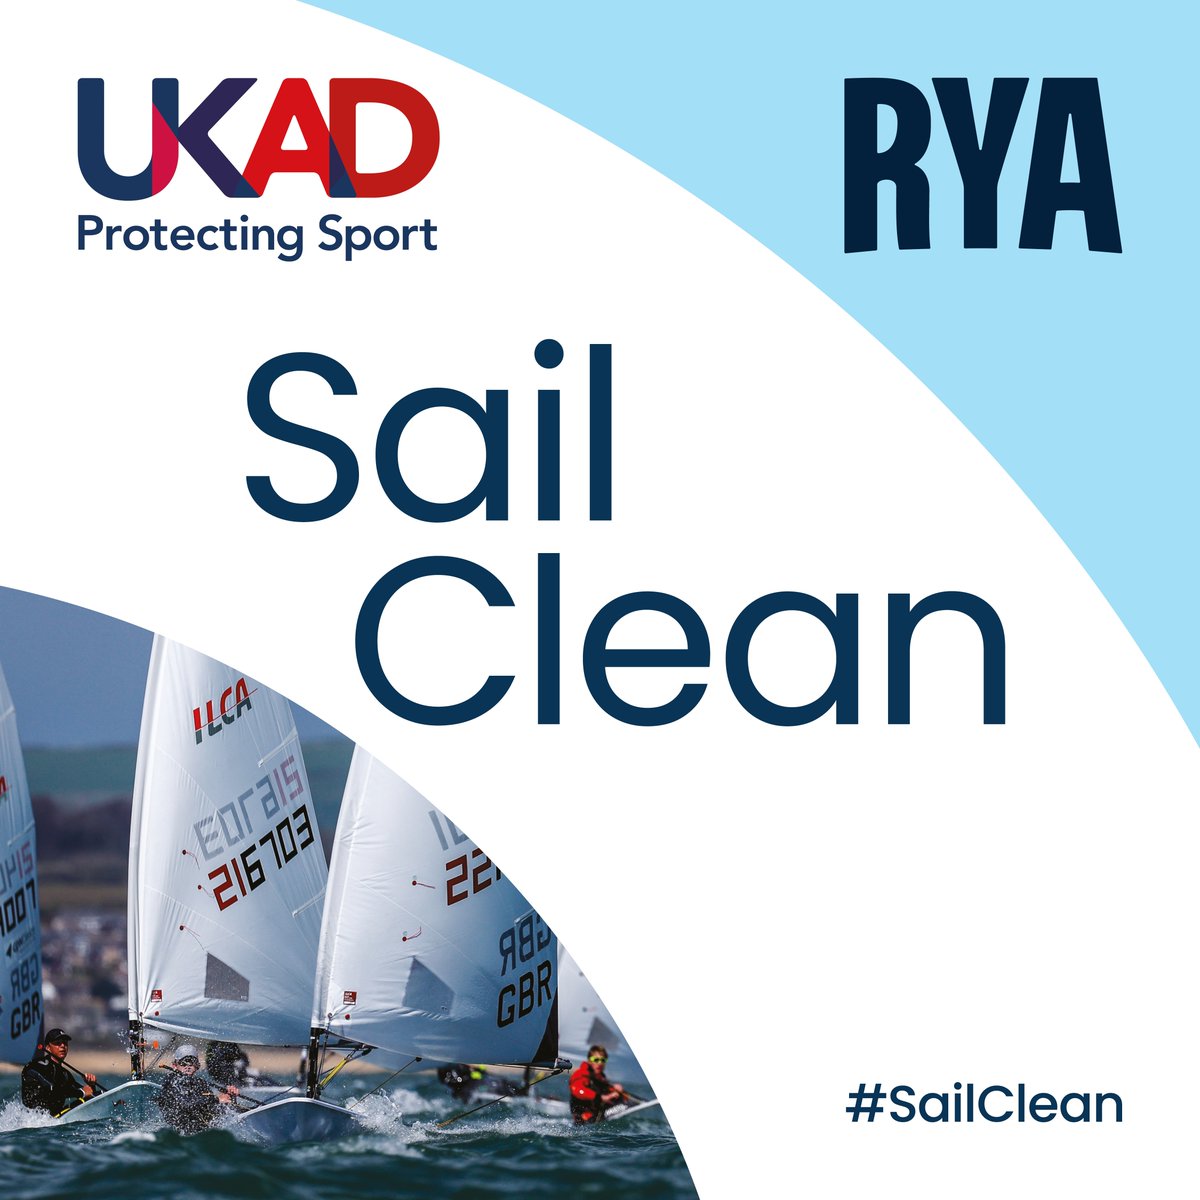 This week we are proudly supporting #CleanSportWeek and @ukantidoping's important work to keep sport clean!

Find out how you can help to #SailClean 👉 rya.org/ktNK50RHho3